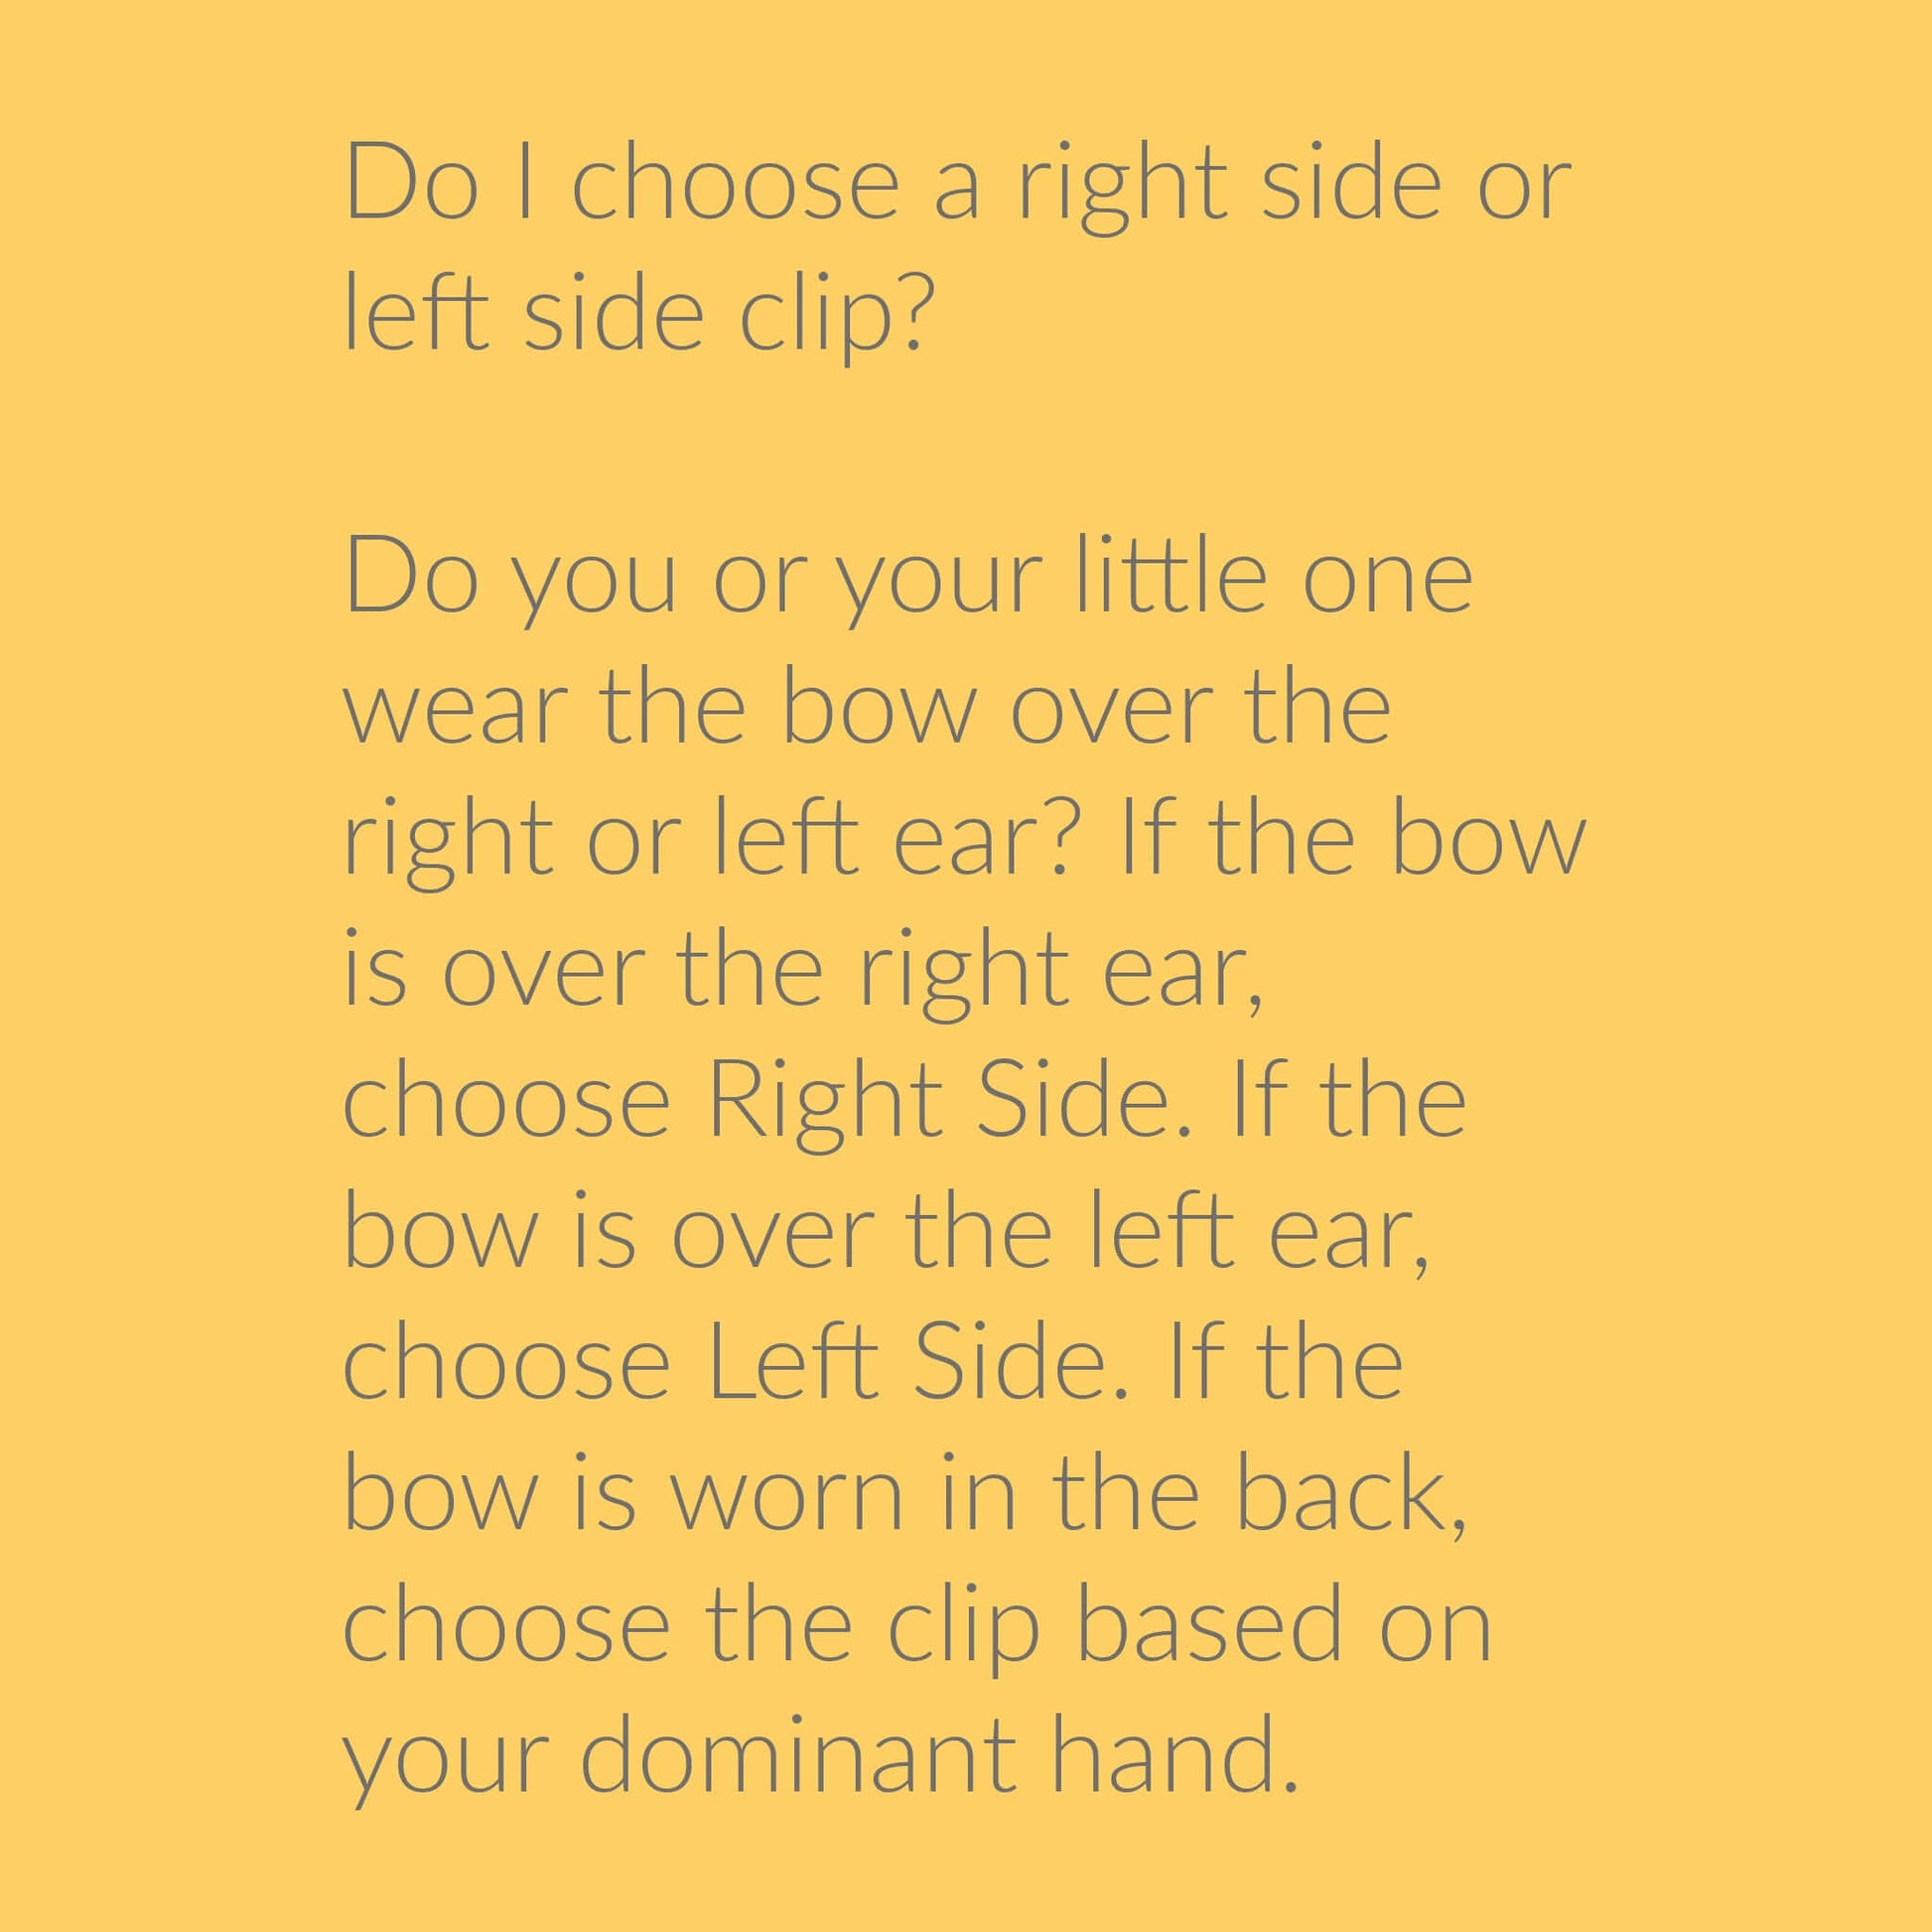 Choose the right or left side clip based on where the bow is worn, with guidance for right, left, and back placement.